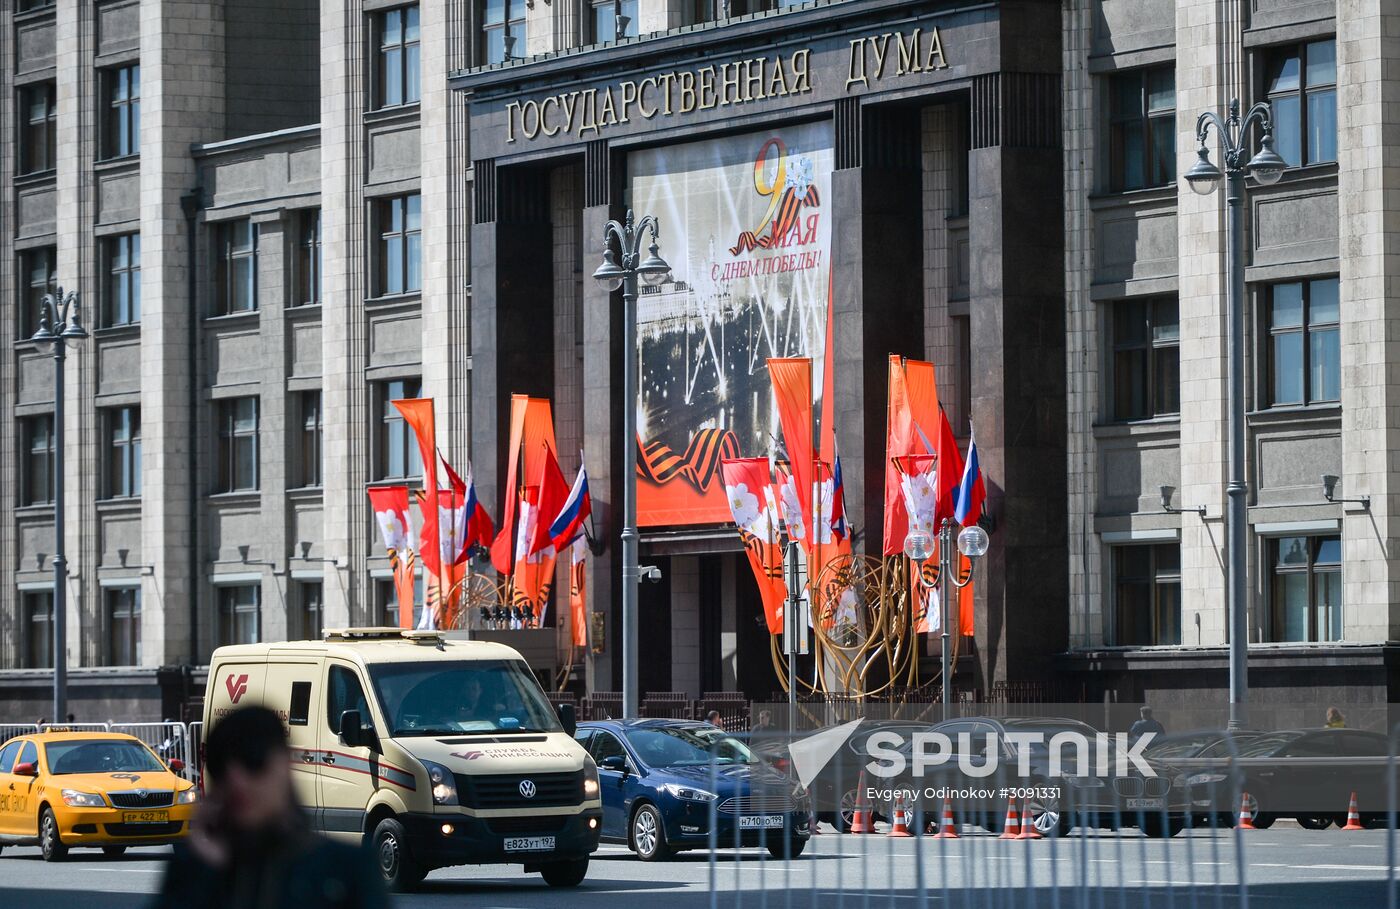 Moscow is decorated for celebrations of 72nd anniversary of victory in Great Patriotic War